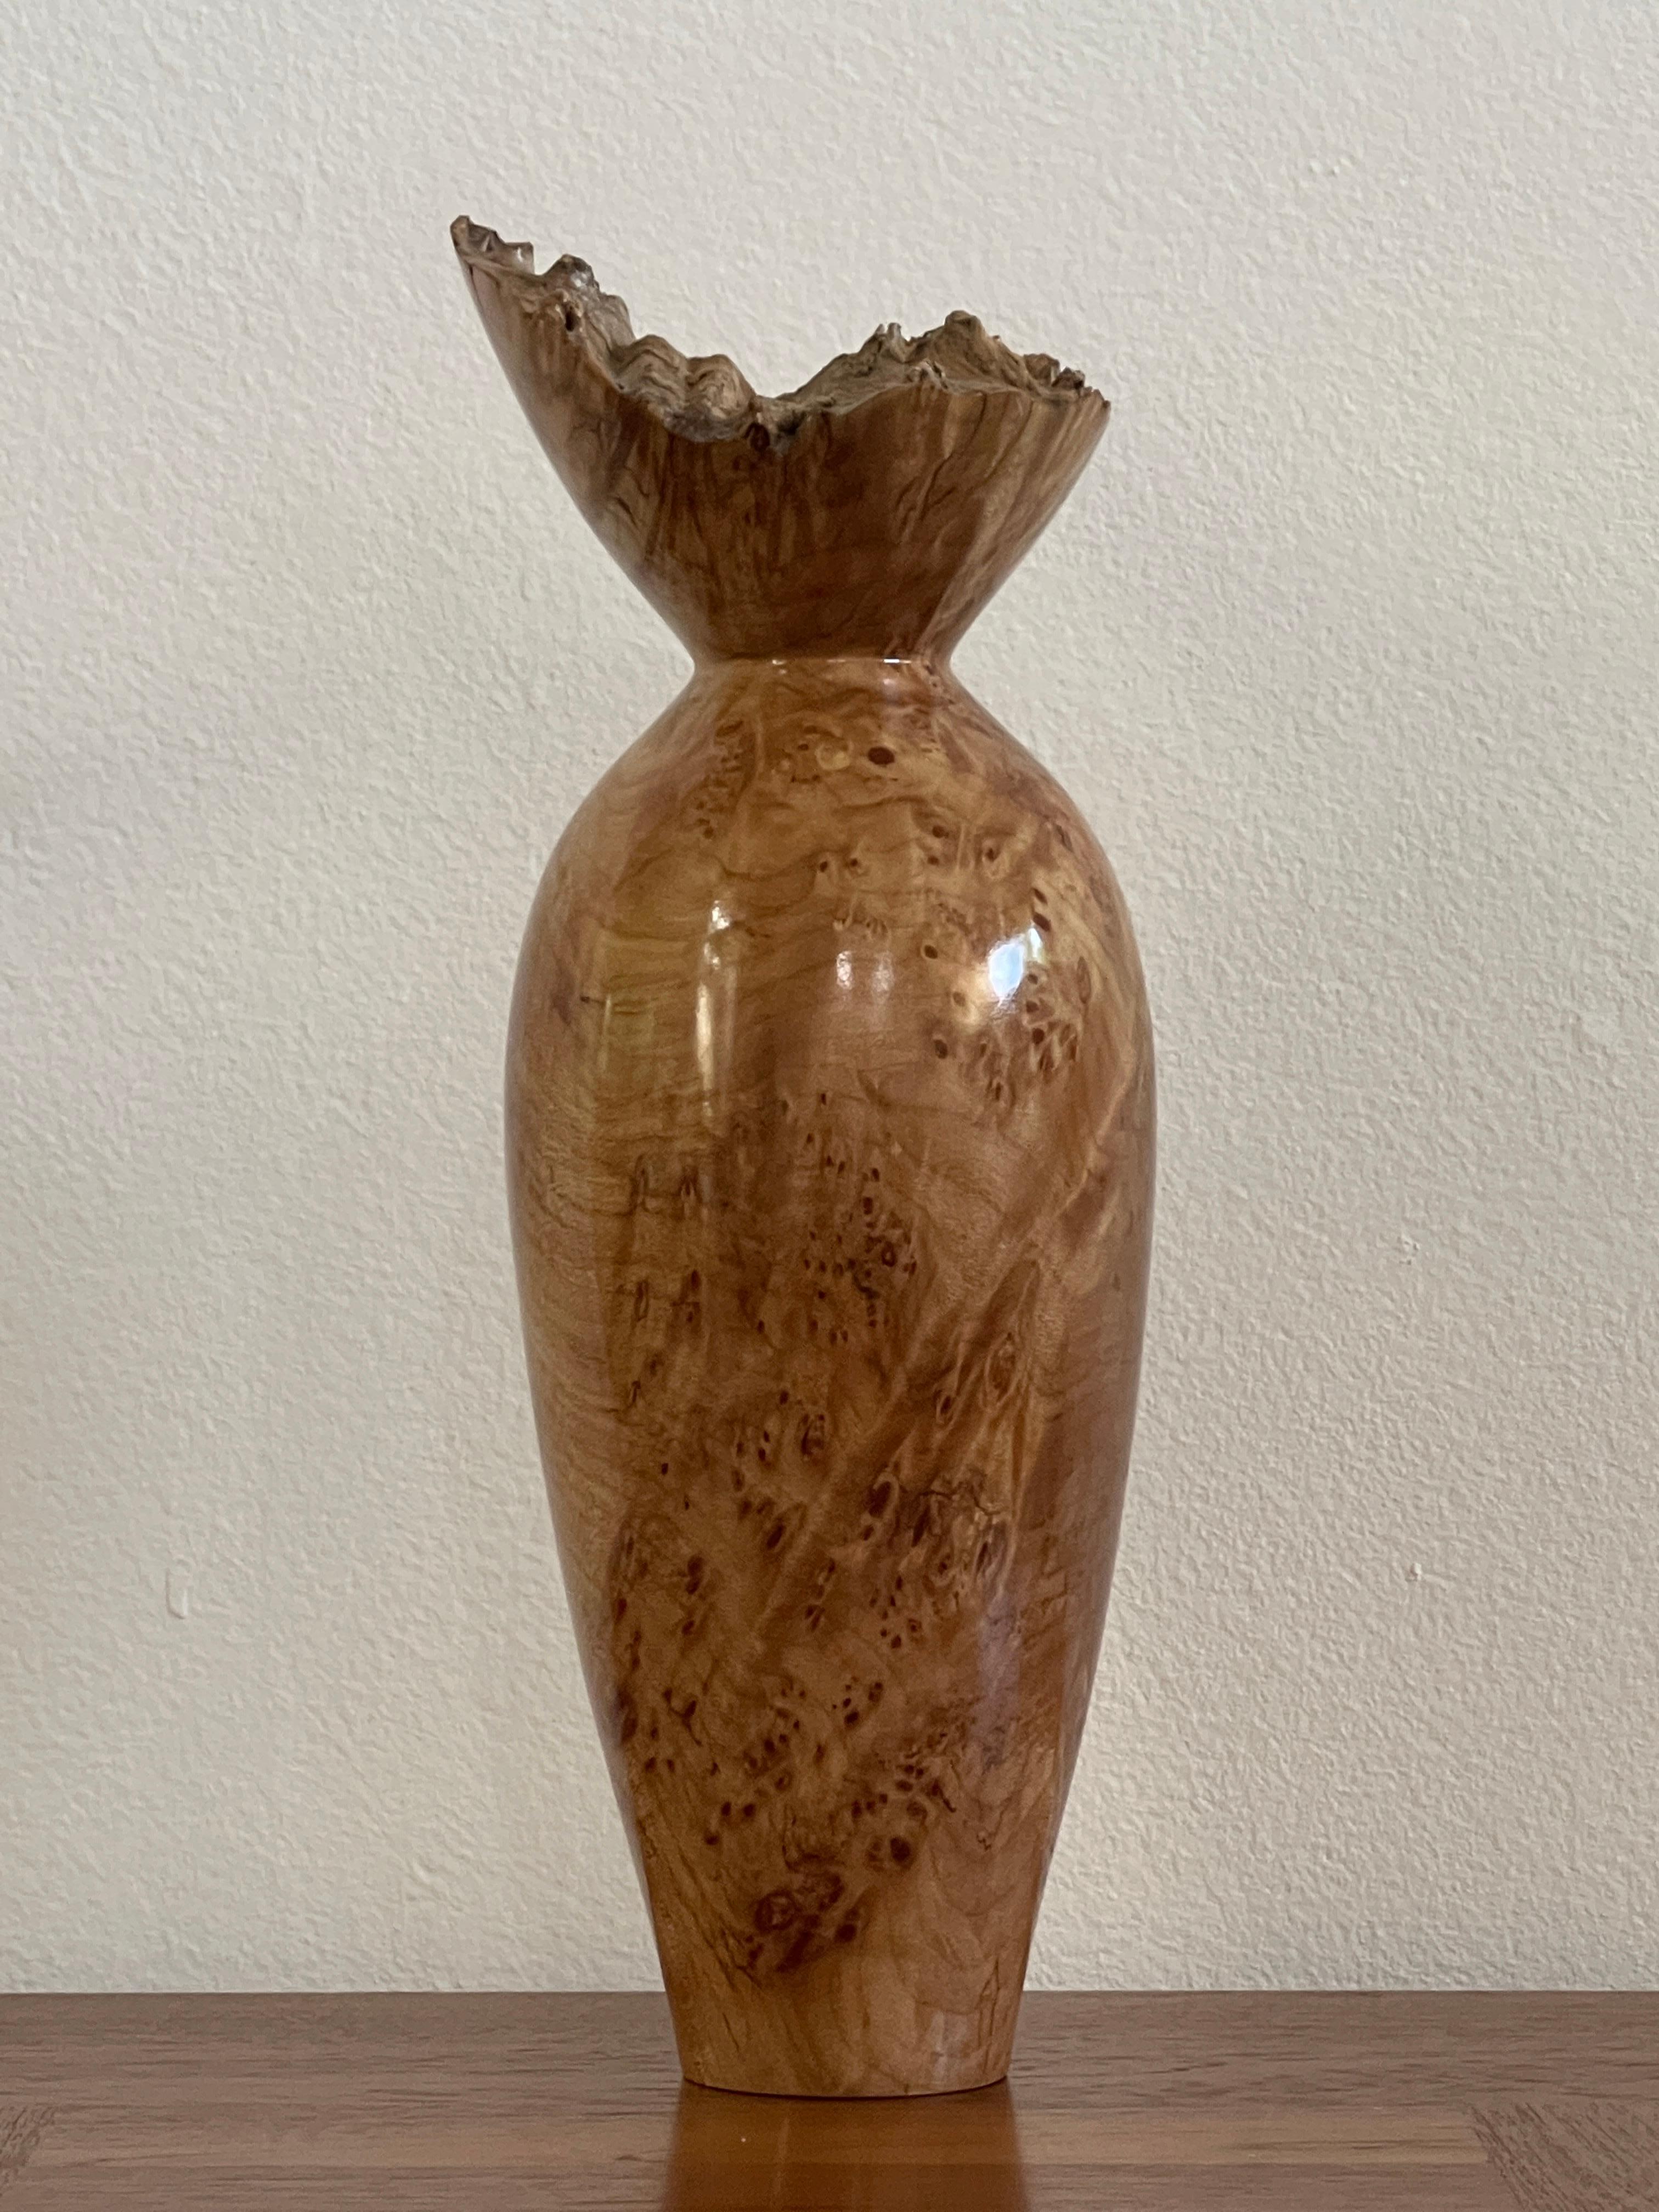 20th Century spalted maple burlwood vase by John Mascoll. This turned wood vessel was crafted by highly regarded Florida based artisan John Mascoll and is composed of Spalted Maple Burl wood. Mascoll, award winning member of the American Association